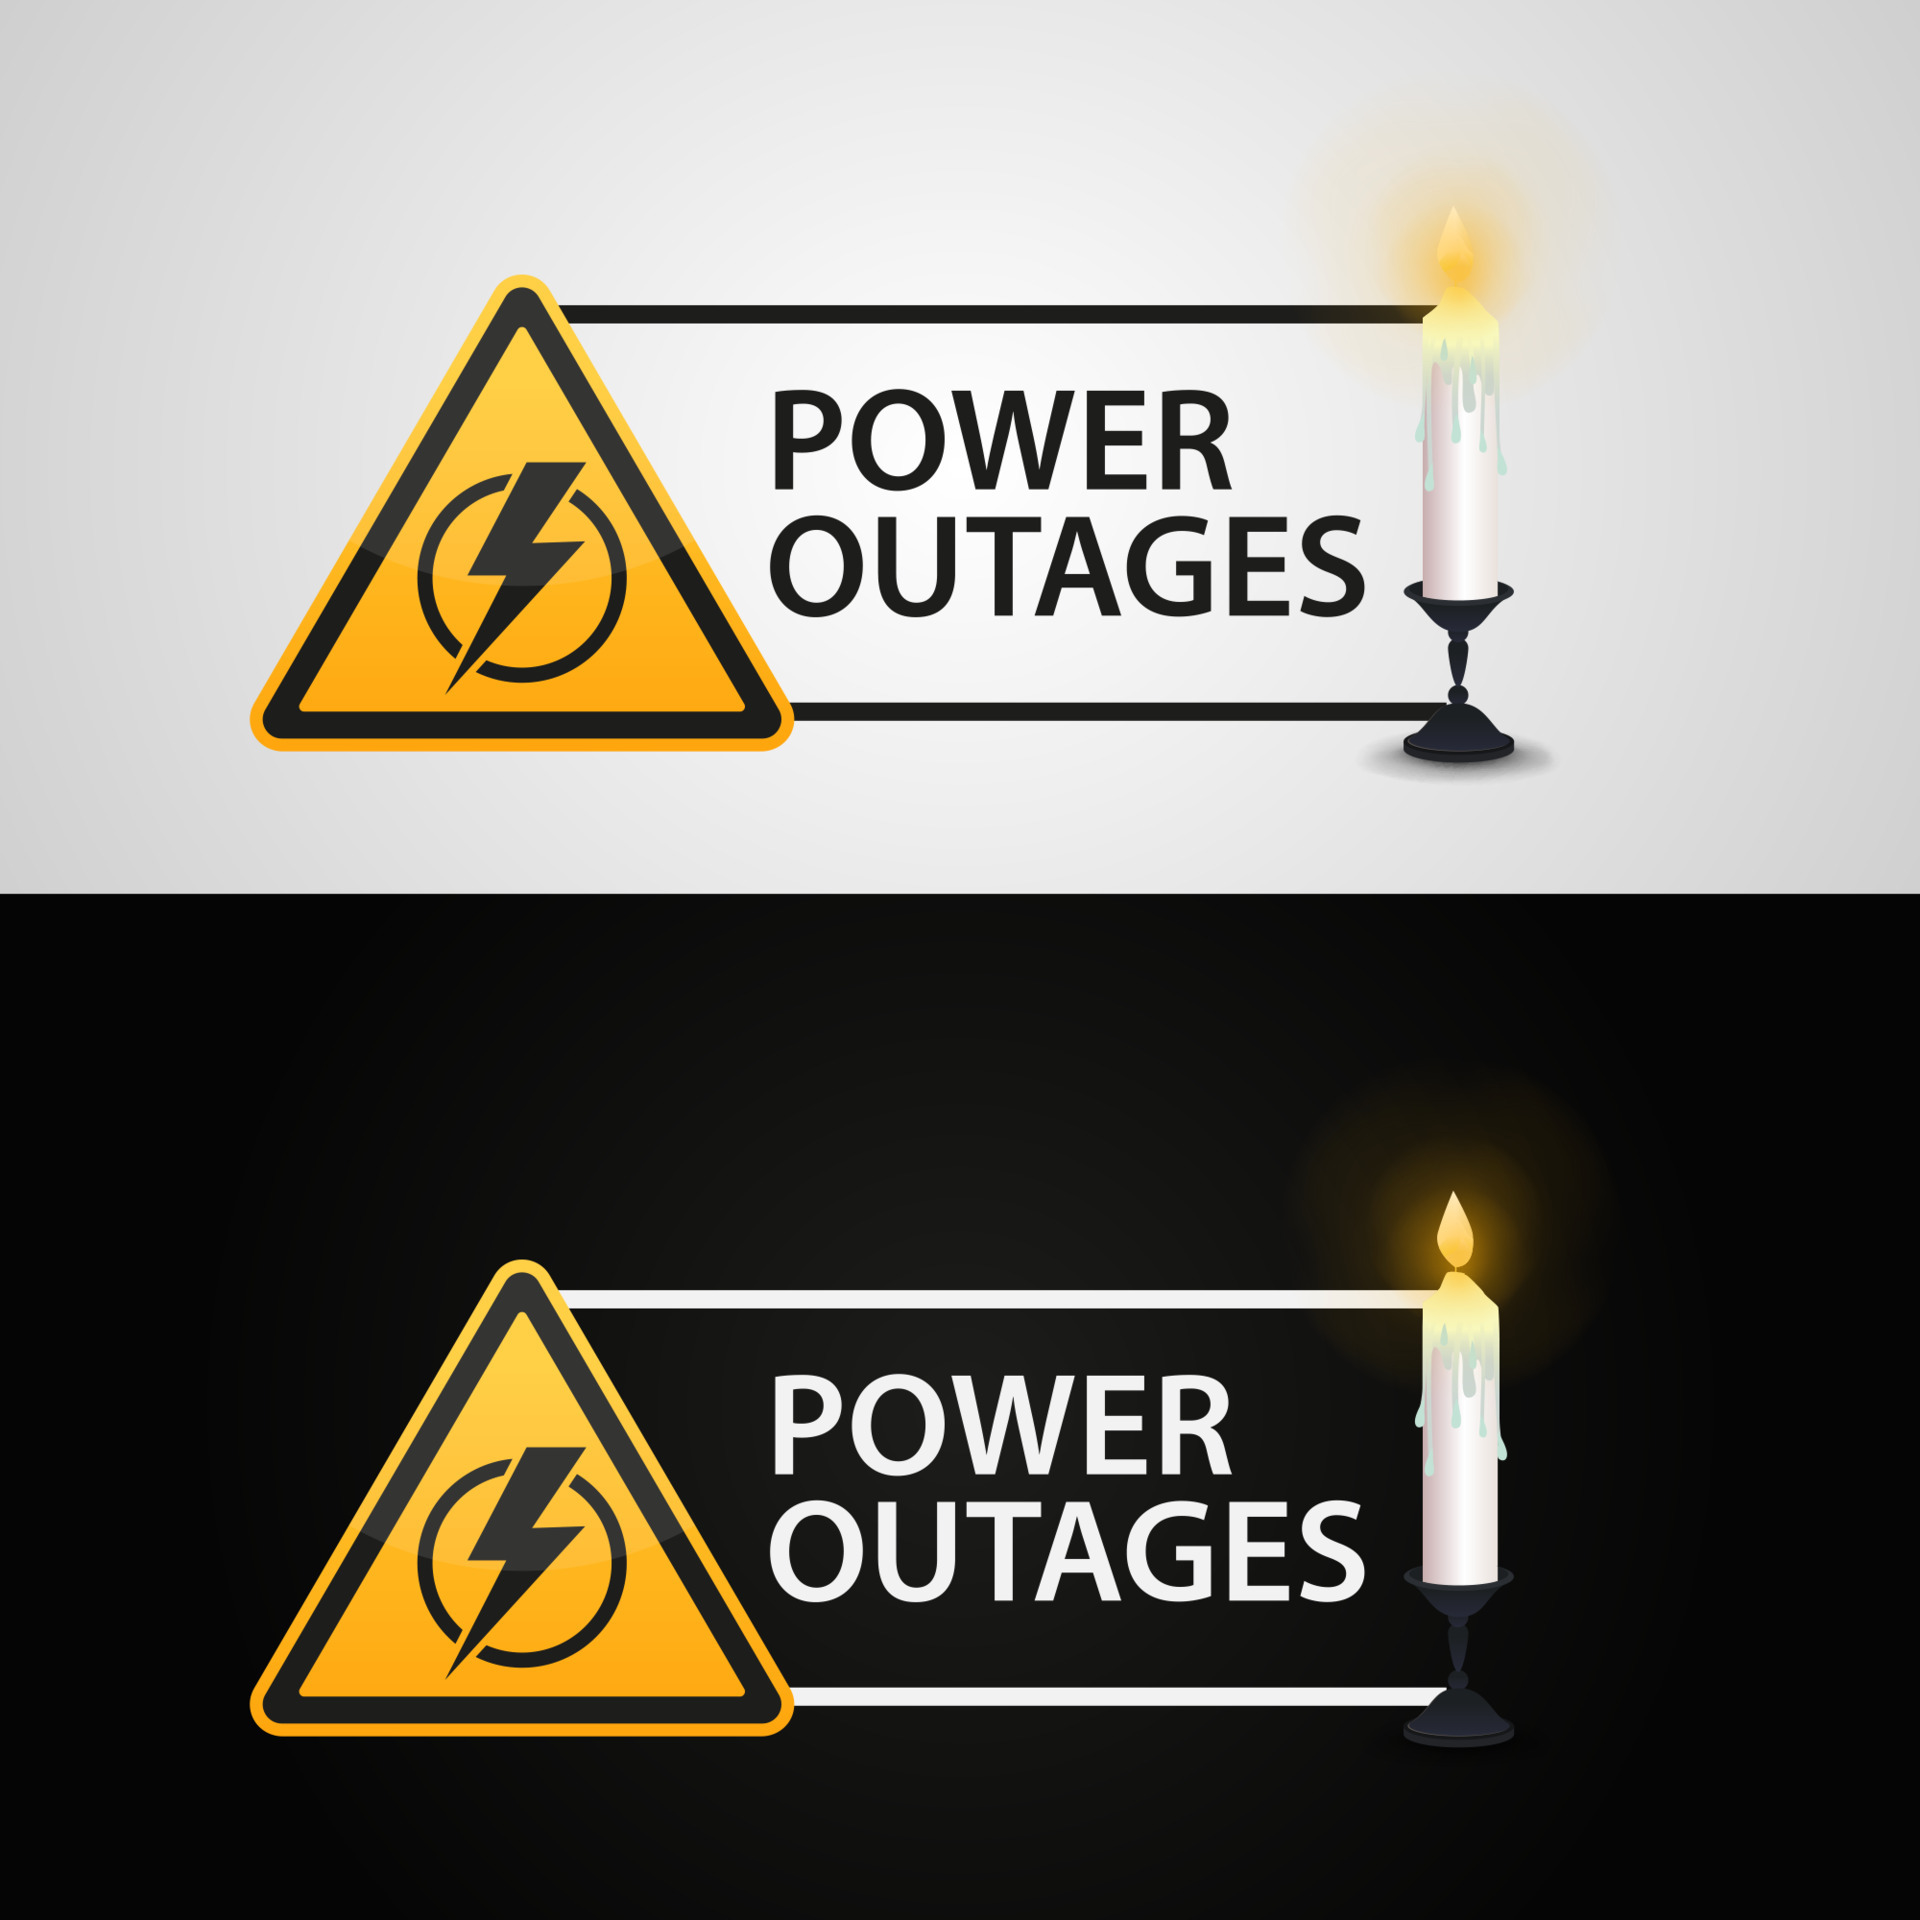 Power outages, banners with candles on a black and white